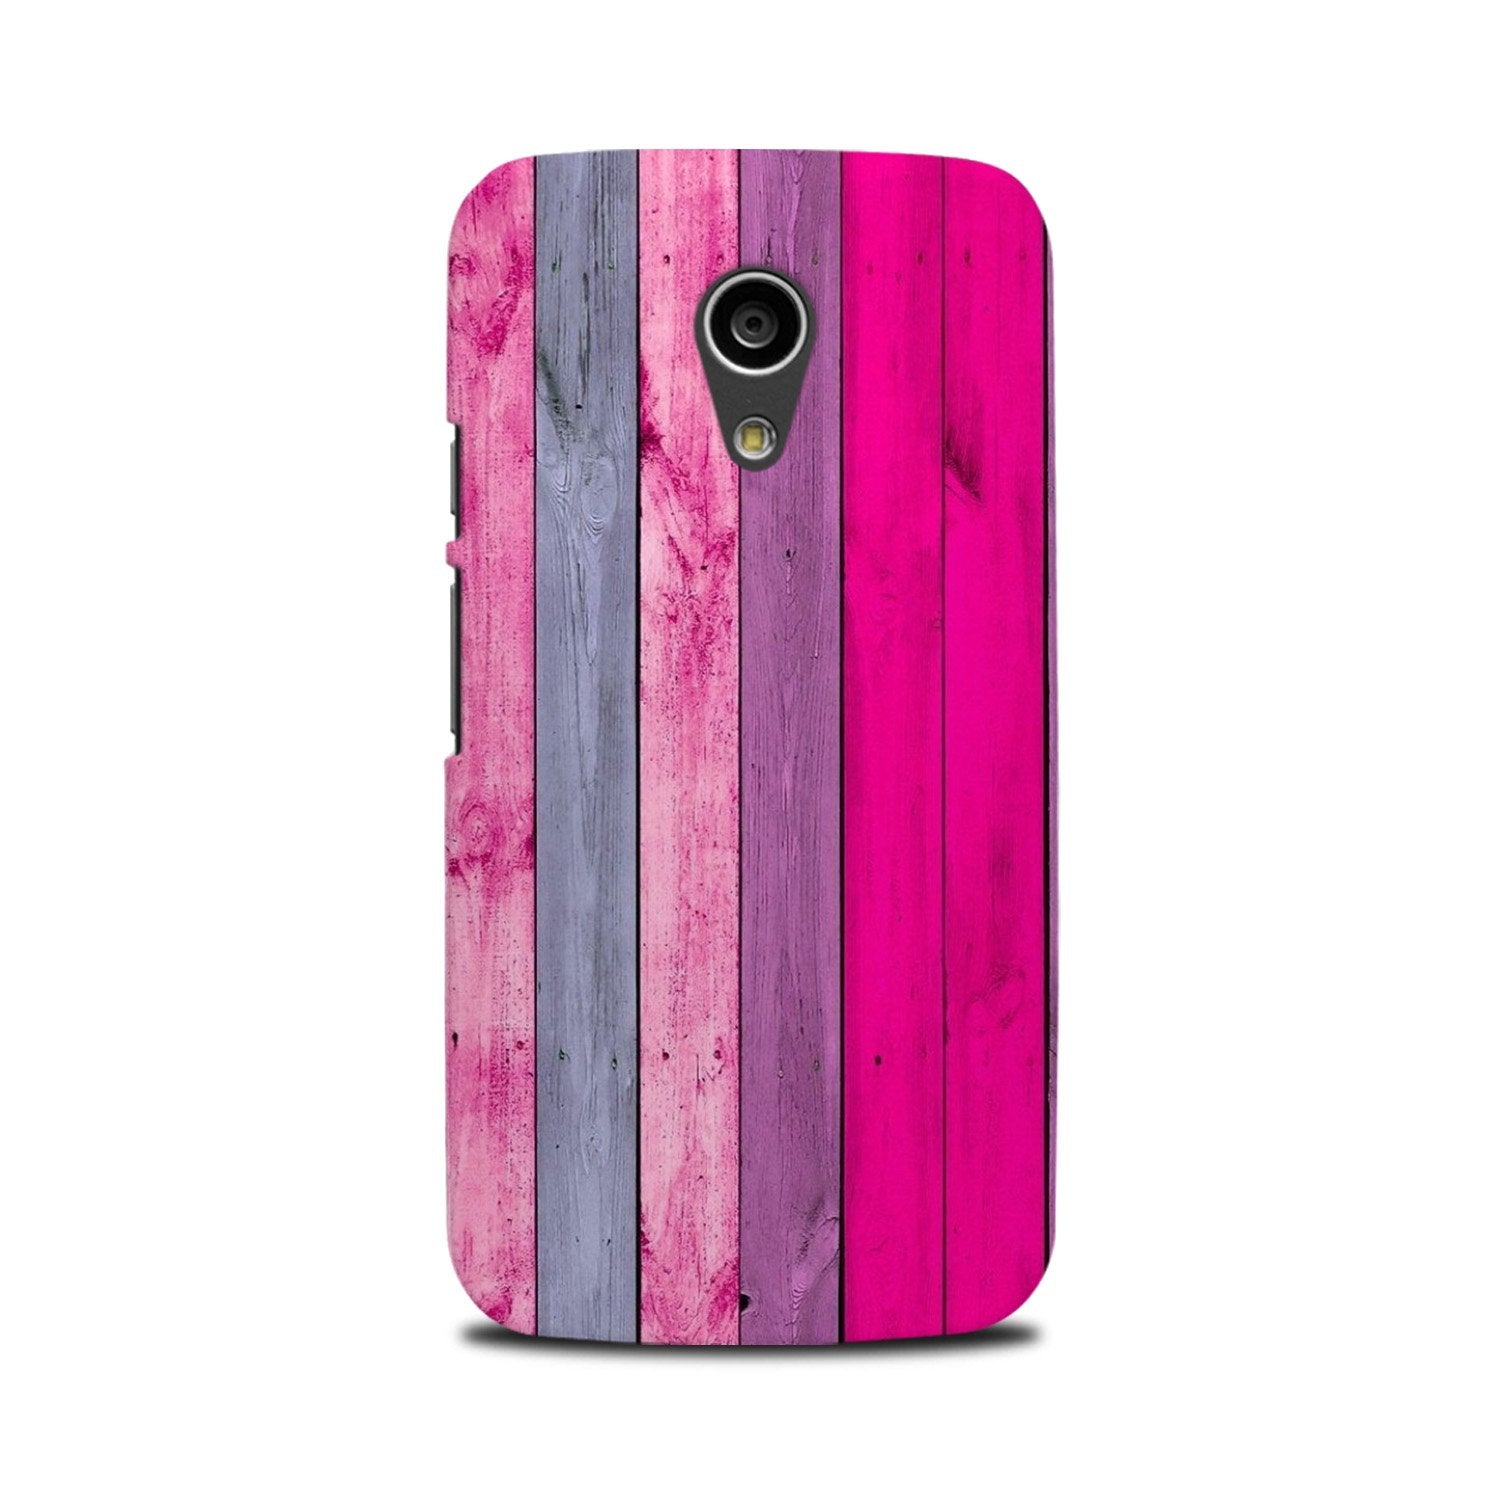 Wooden look Case for Moto G2